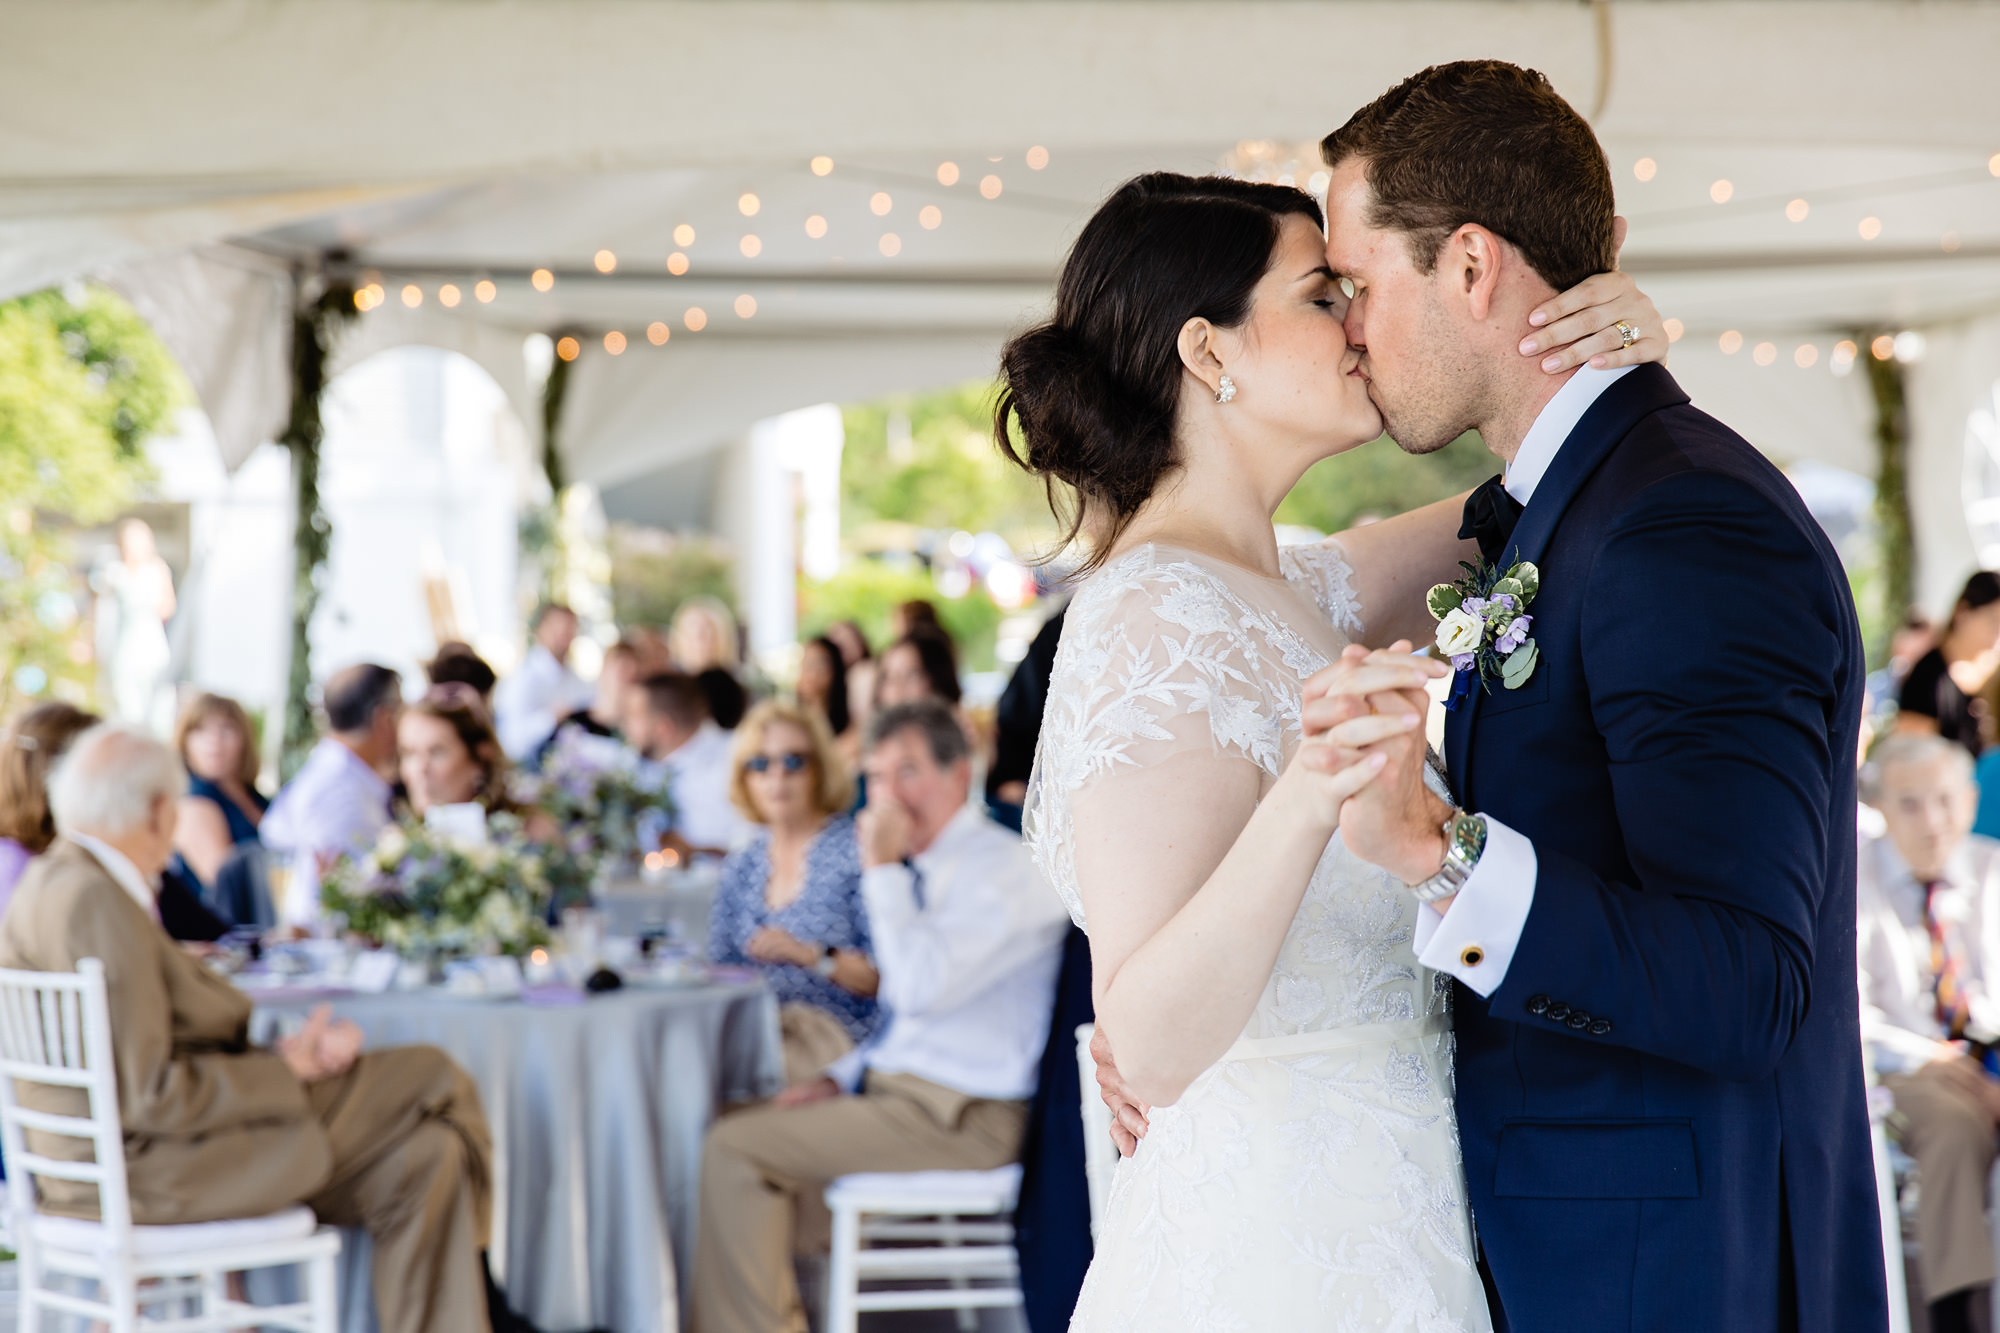 A tented wedding reception at the Beachmere Inn in Ogunquit, Maine